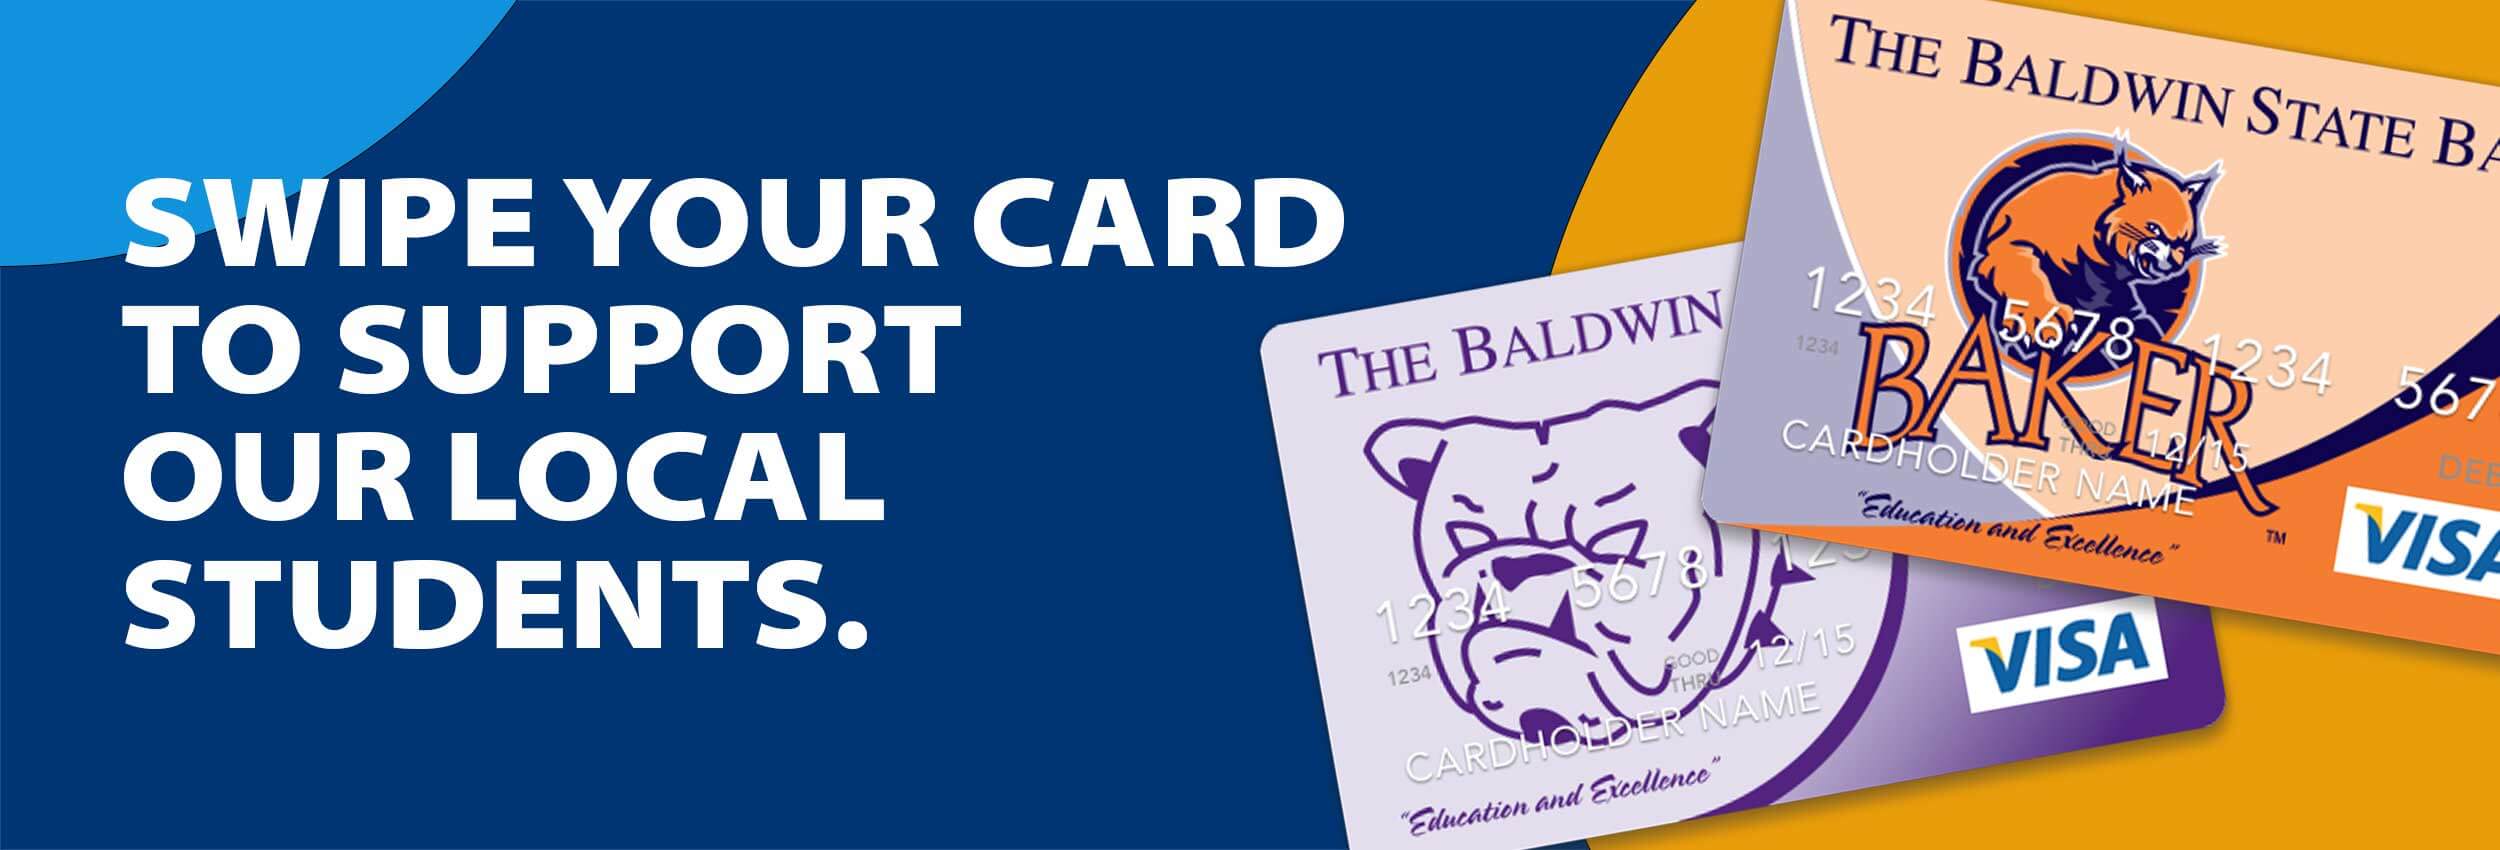 Swipe your card to support our local students.